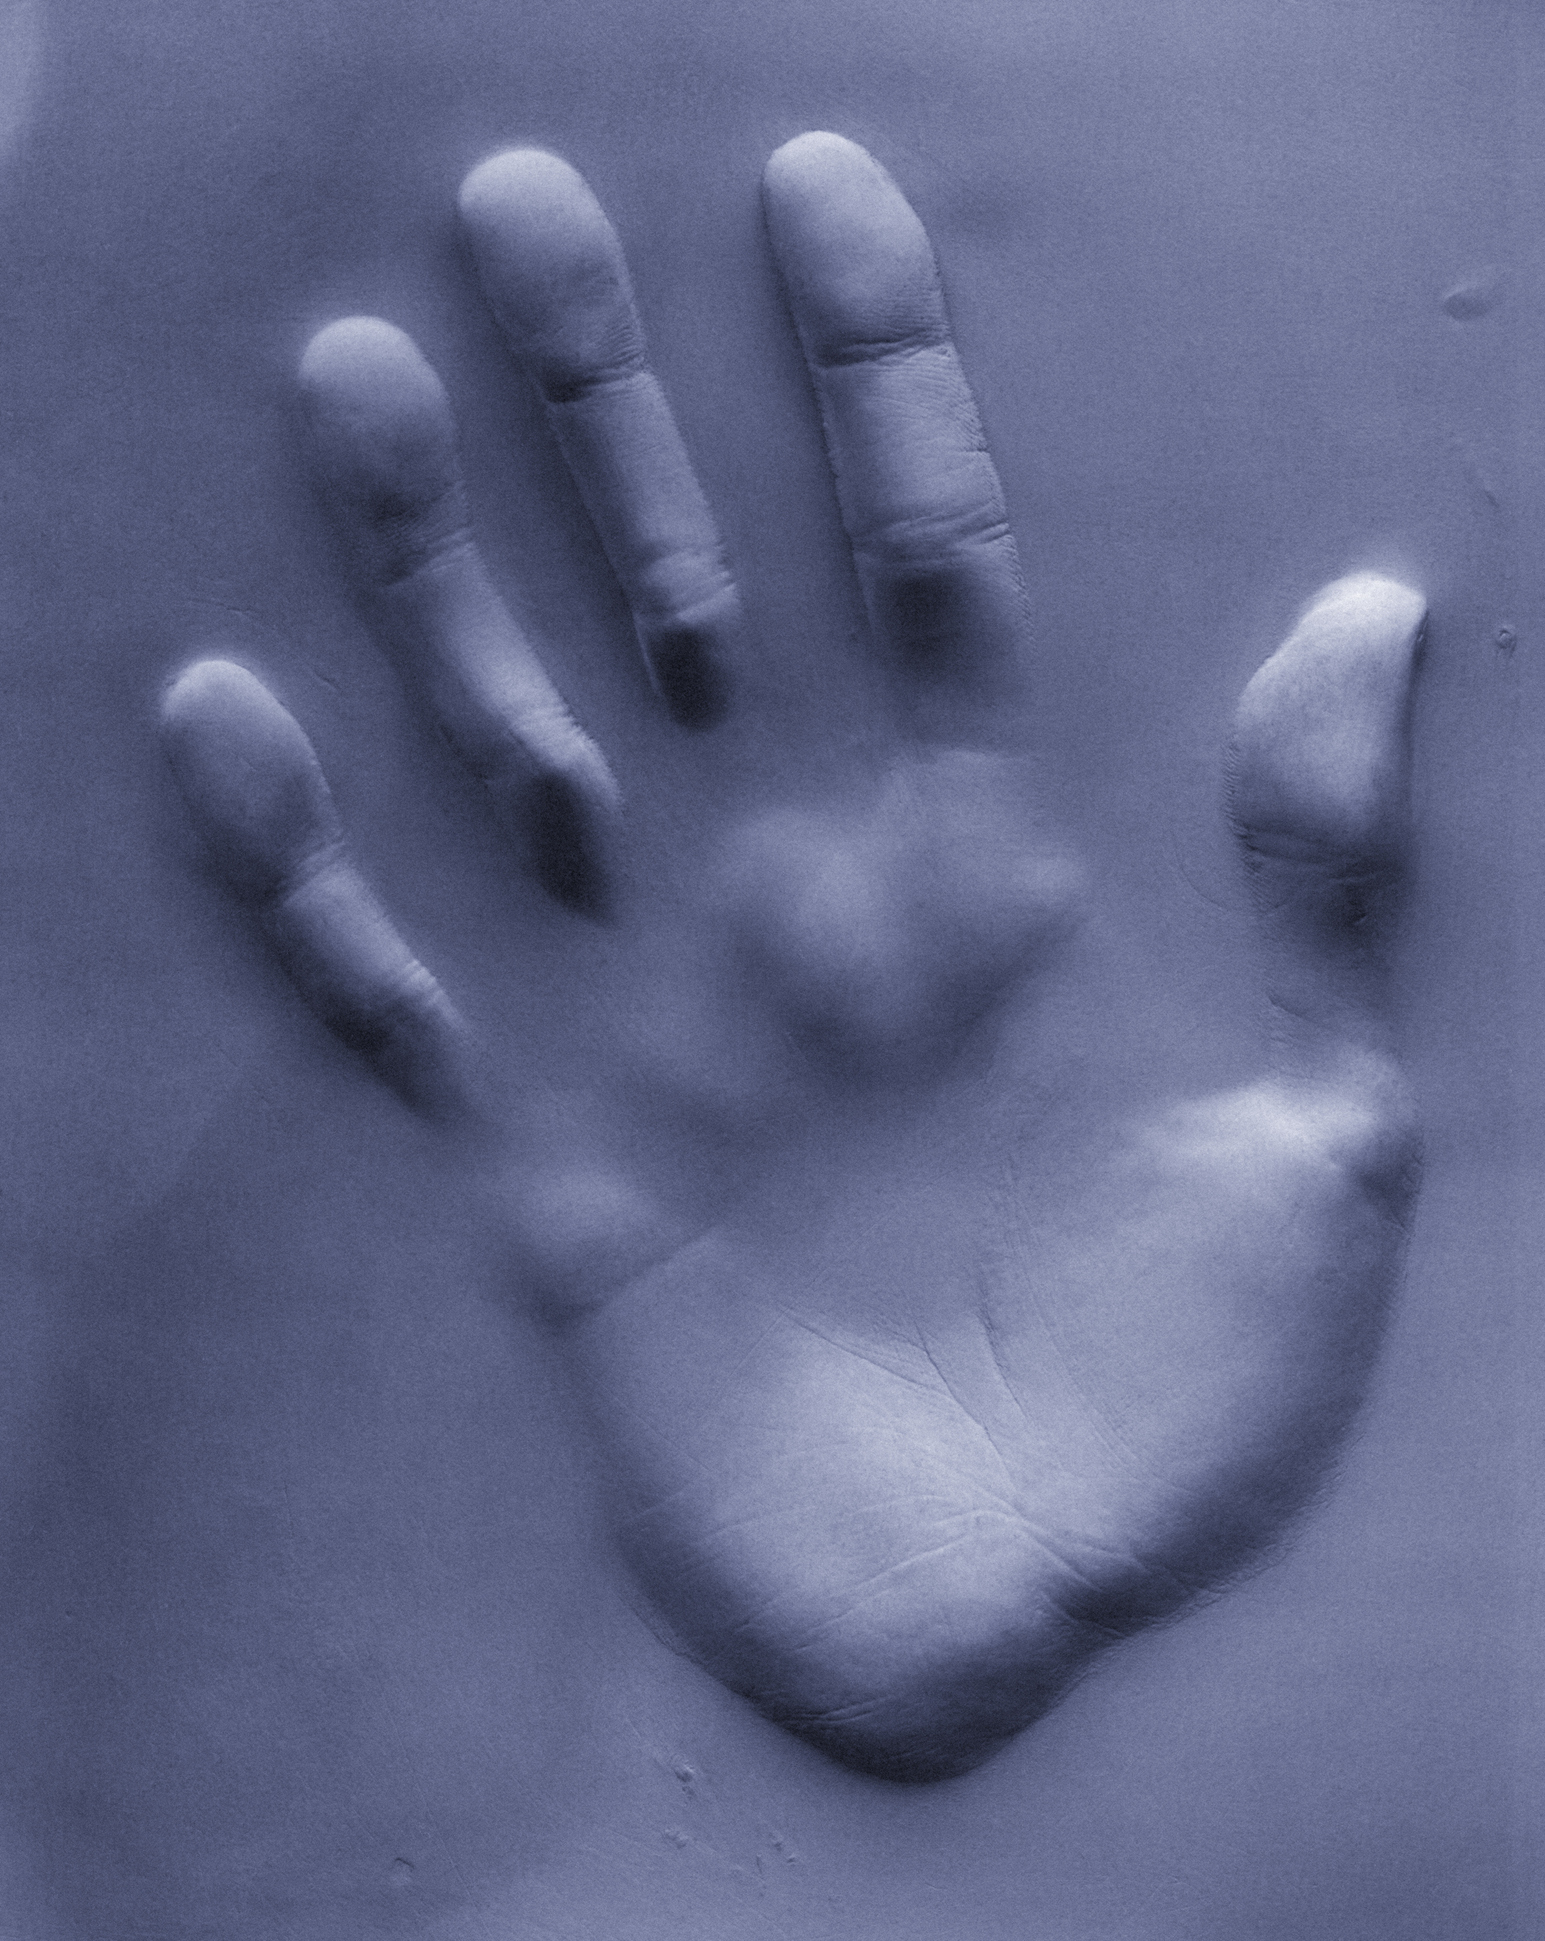 Imprint of a human hand pressed into a soft surface creating a relief effect